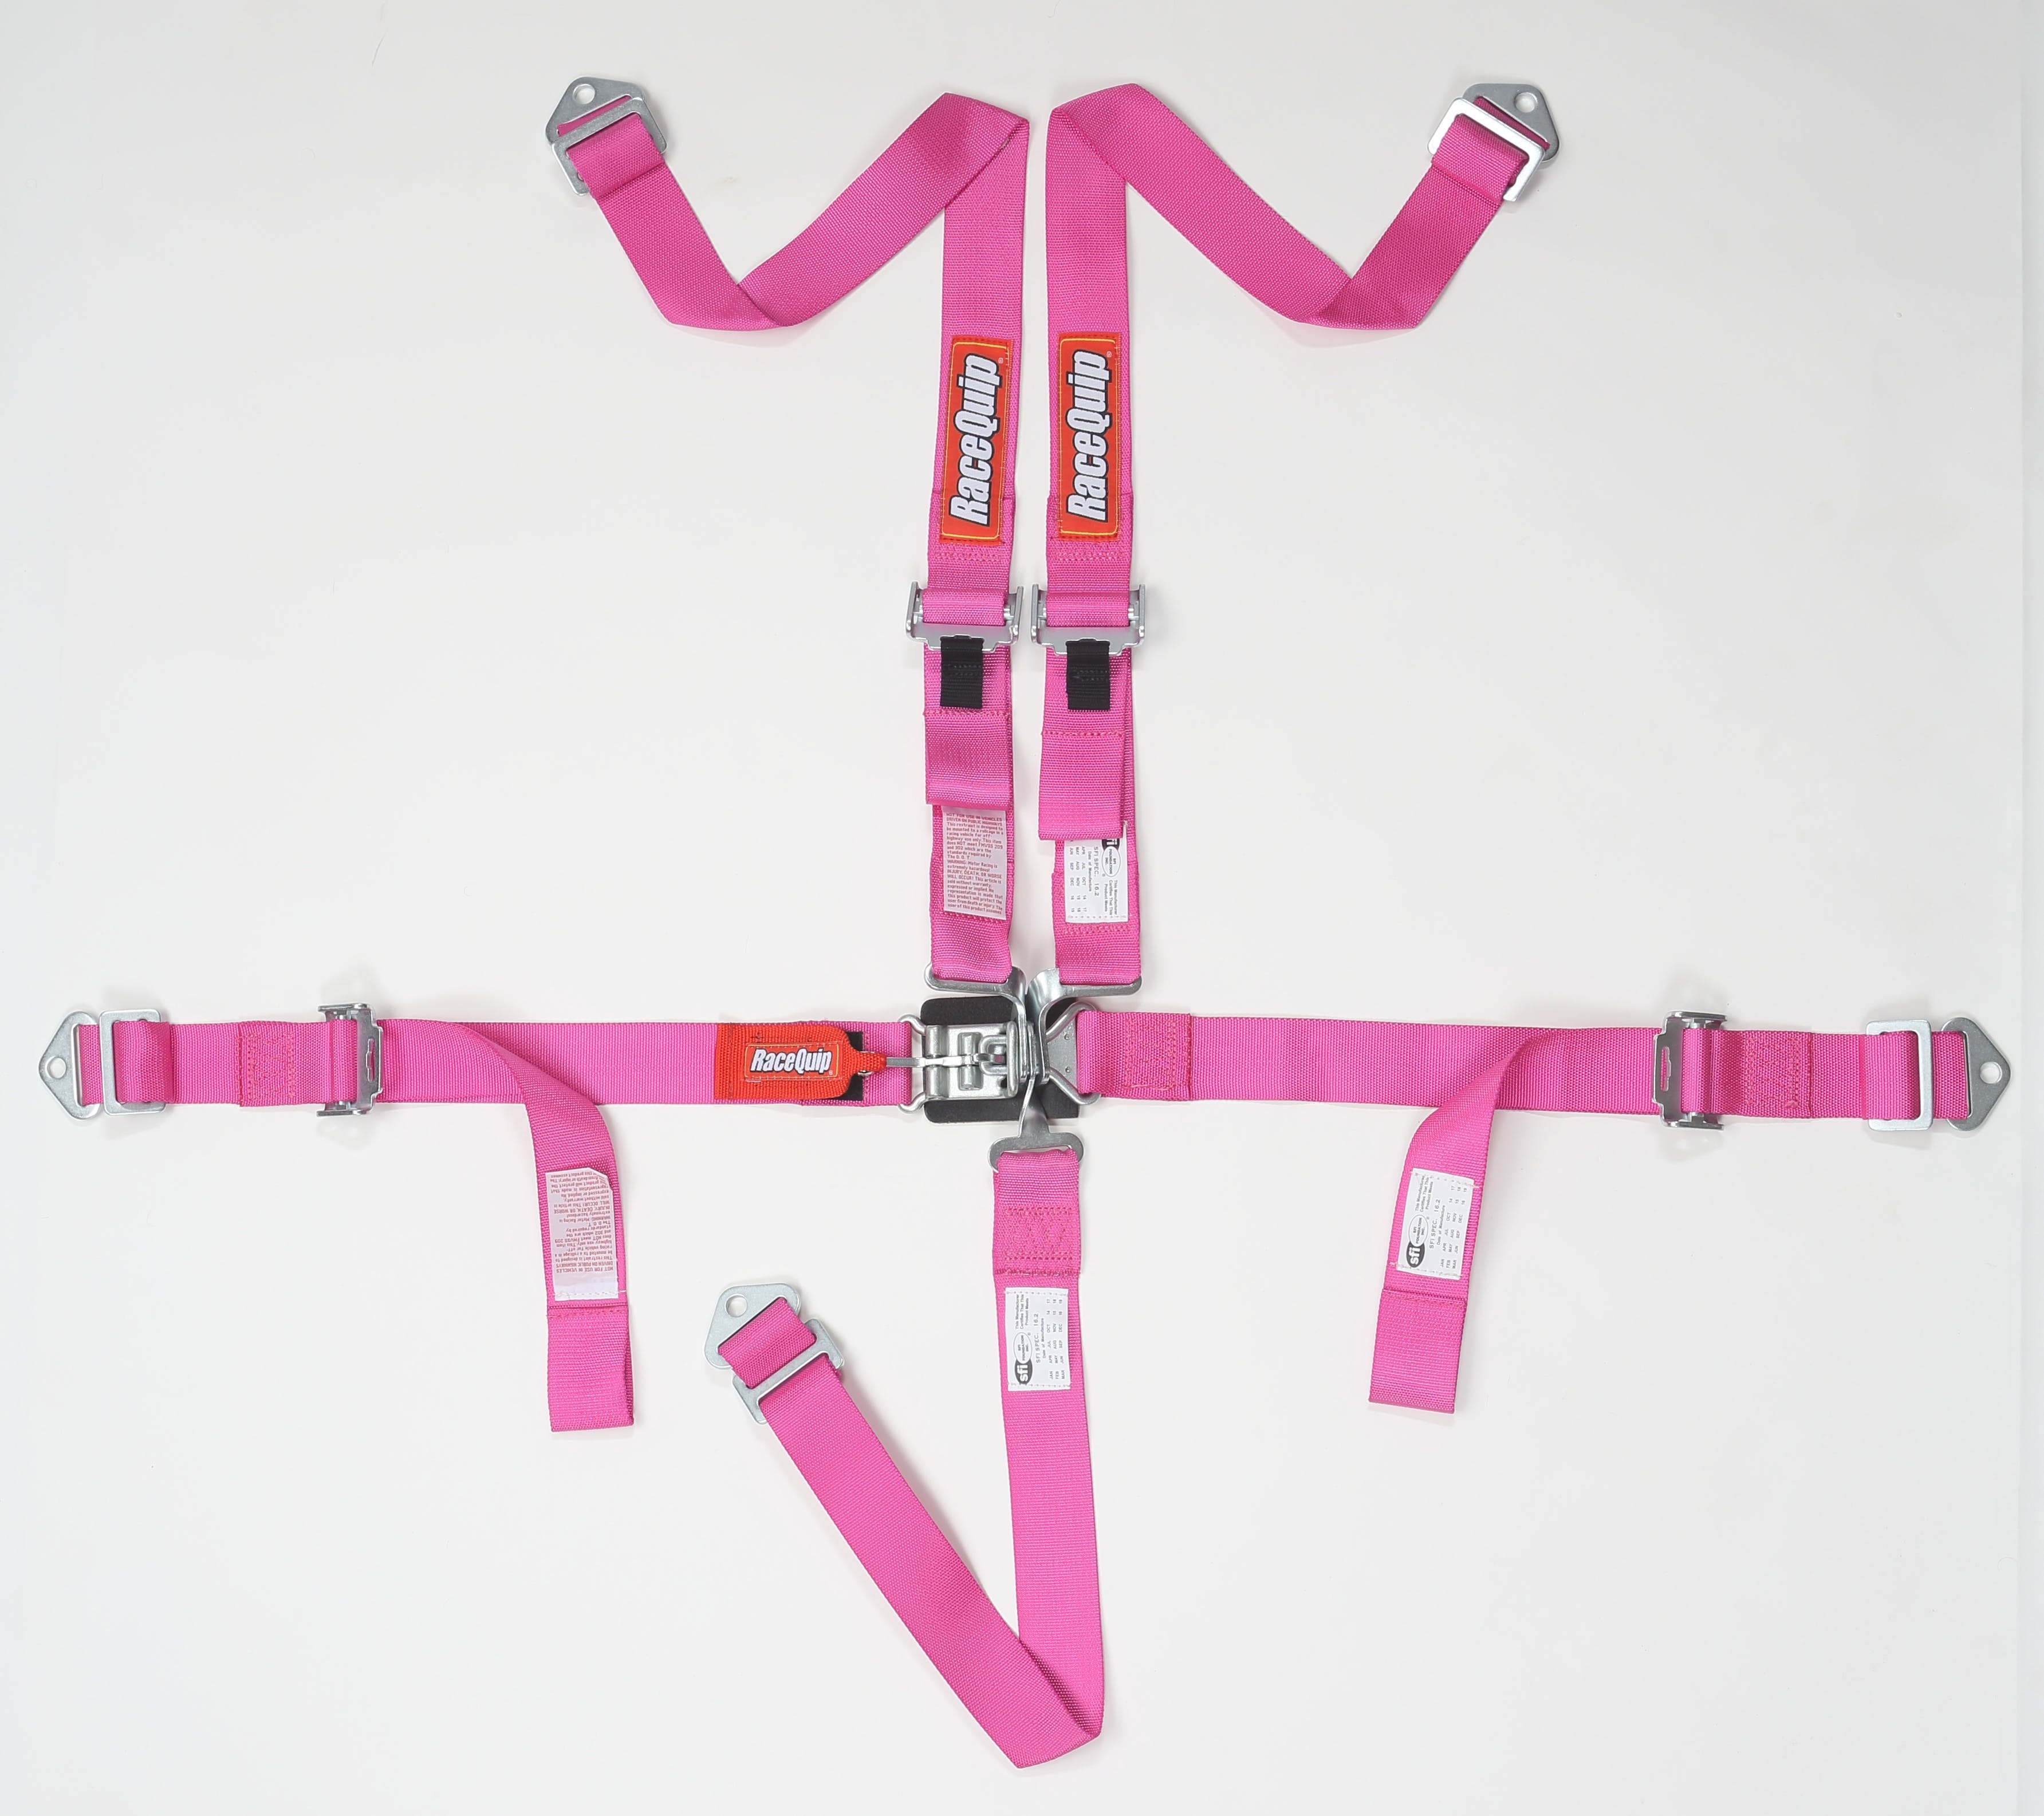 RaceQuip 709089 SFI 16.2 JR Dragster and Quarter Midget 5-Point Youth Racing Harness Set (Pink)